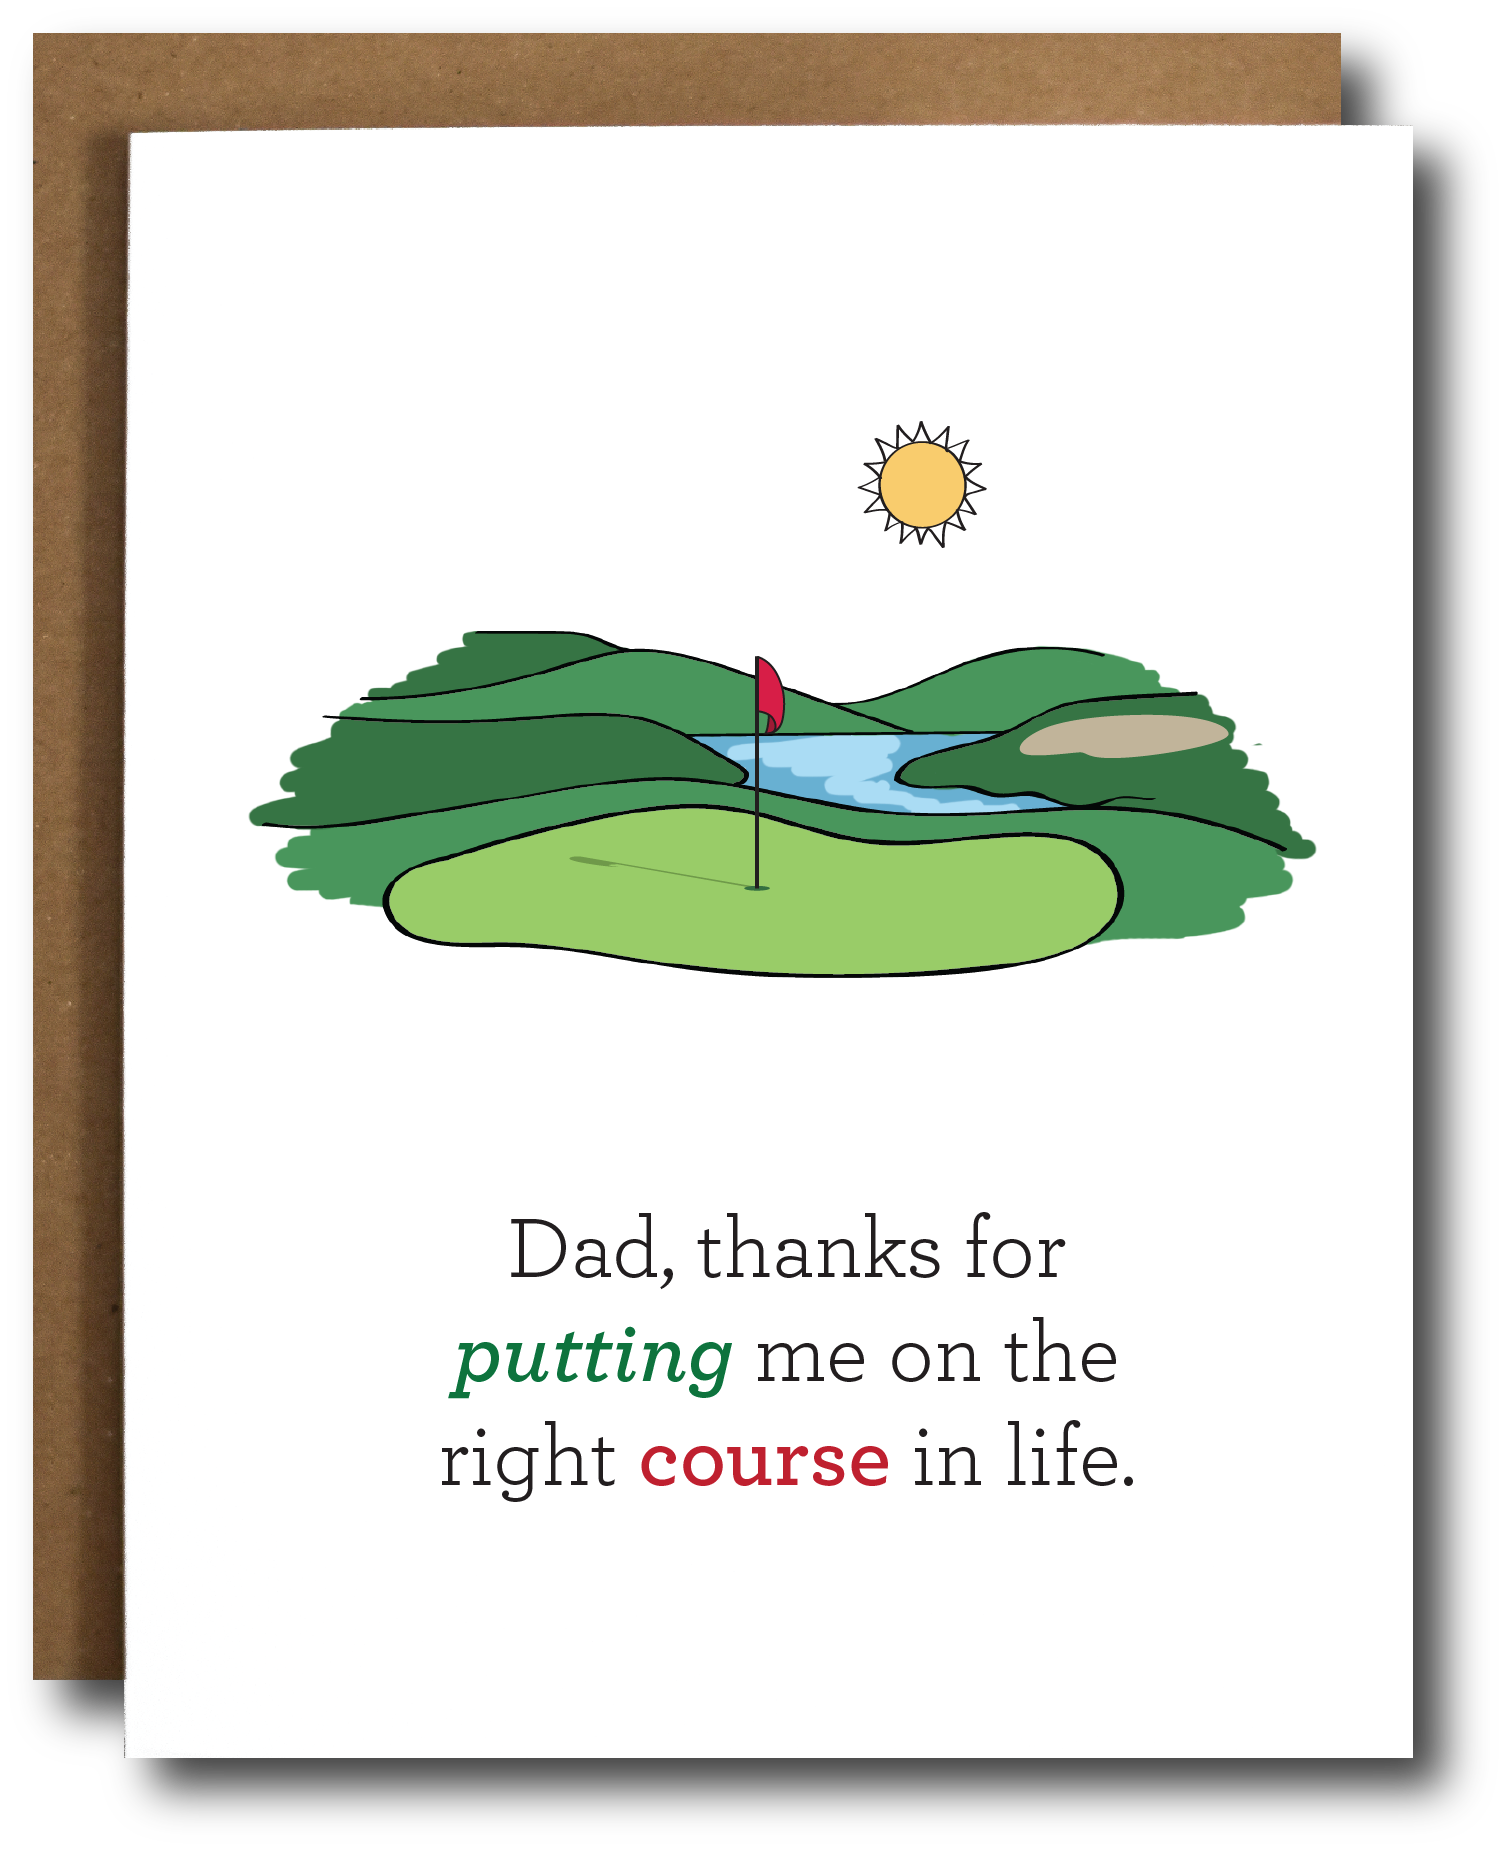 golf fathers day